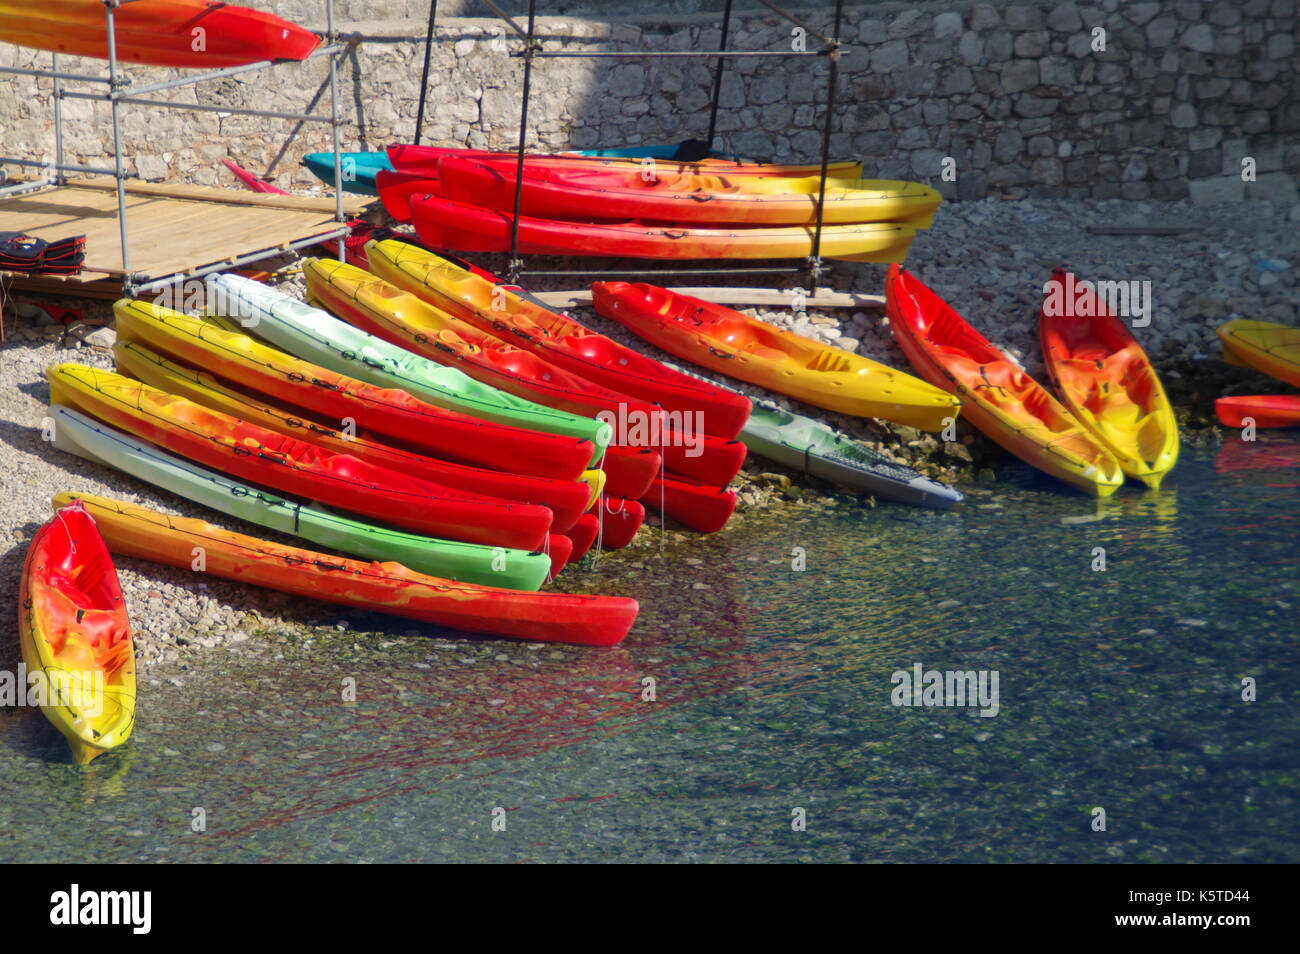 Colorful canoes on water. Red and yellow kayaks ready for summer activities and recreation. Stock Photo